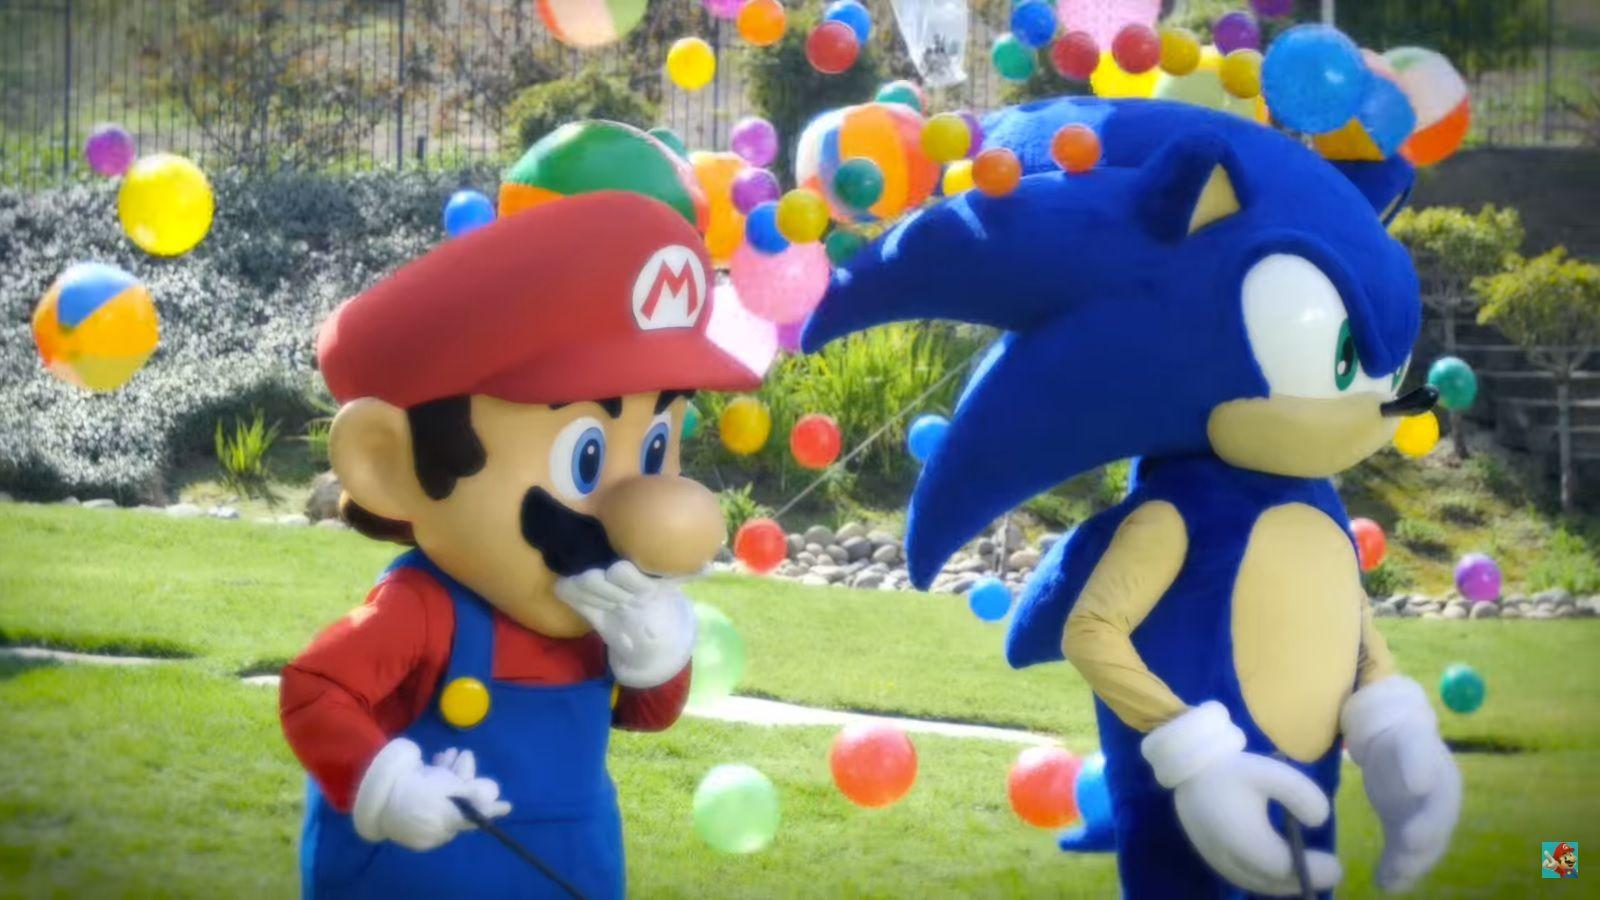 Mario & Sonic at the Rio 2016 Olympic Games 2: Training